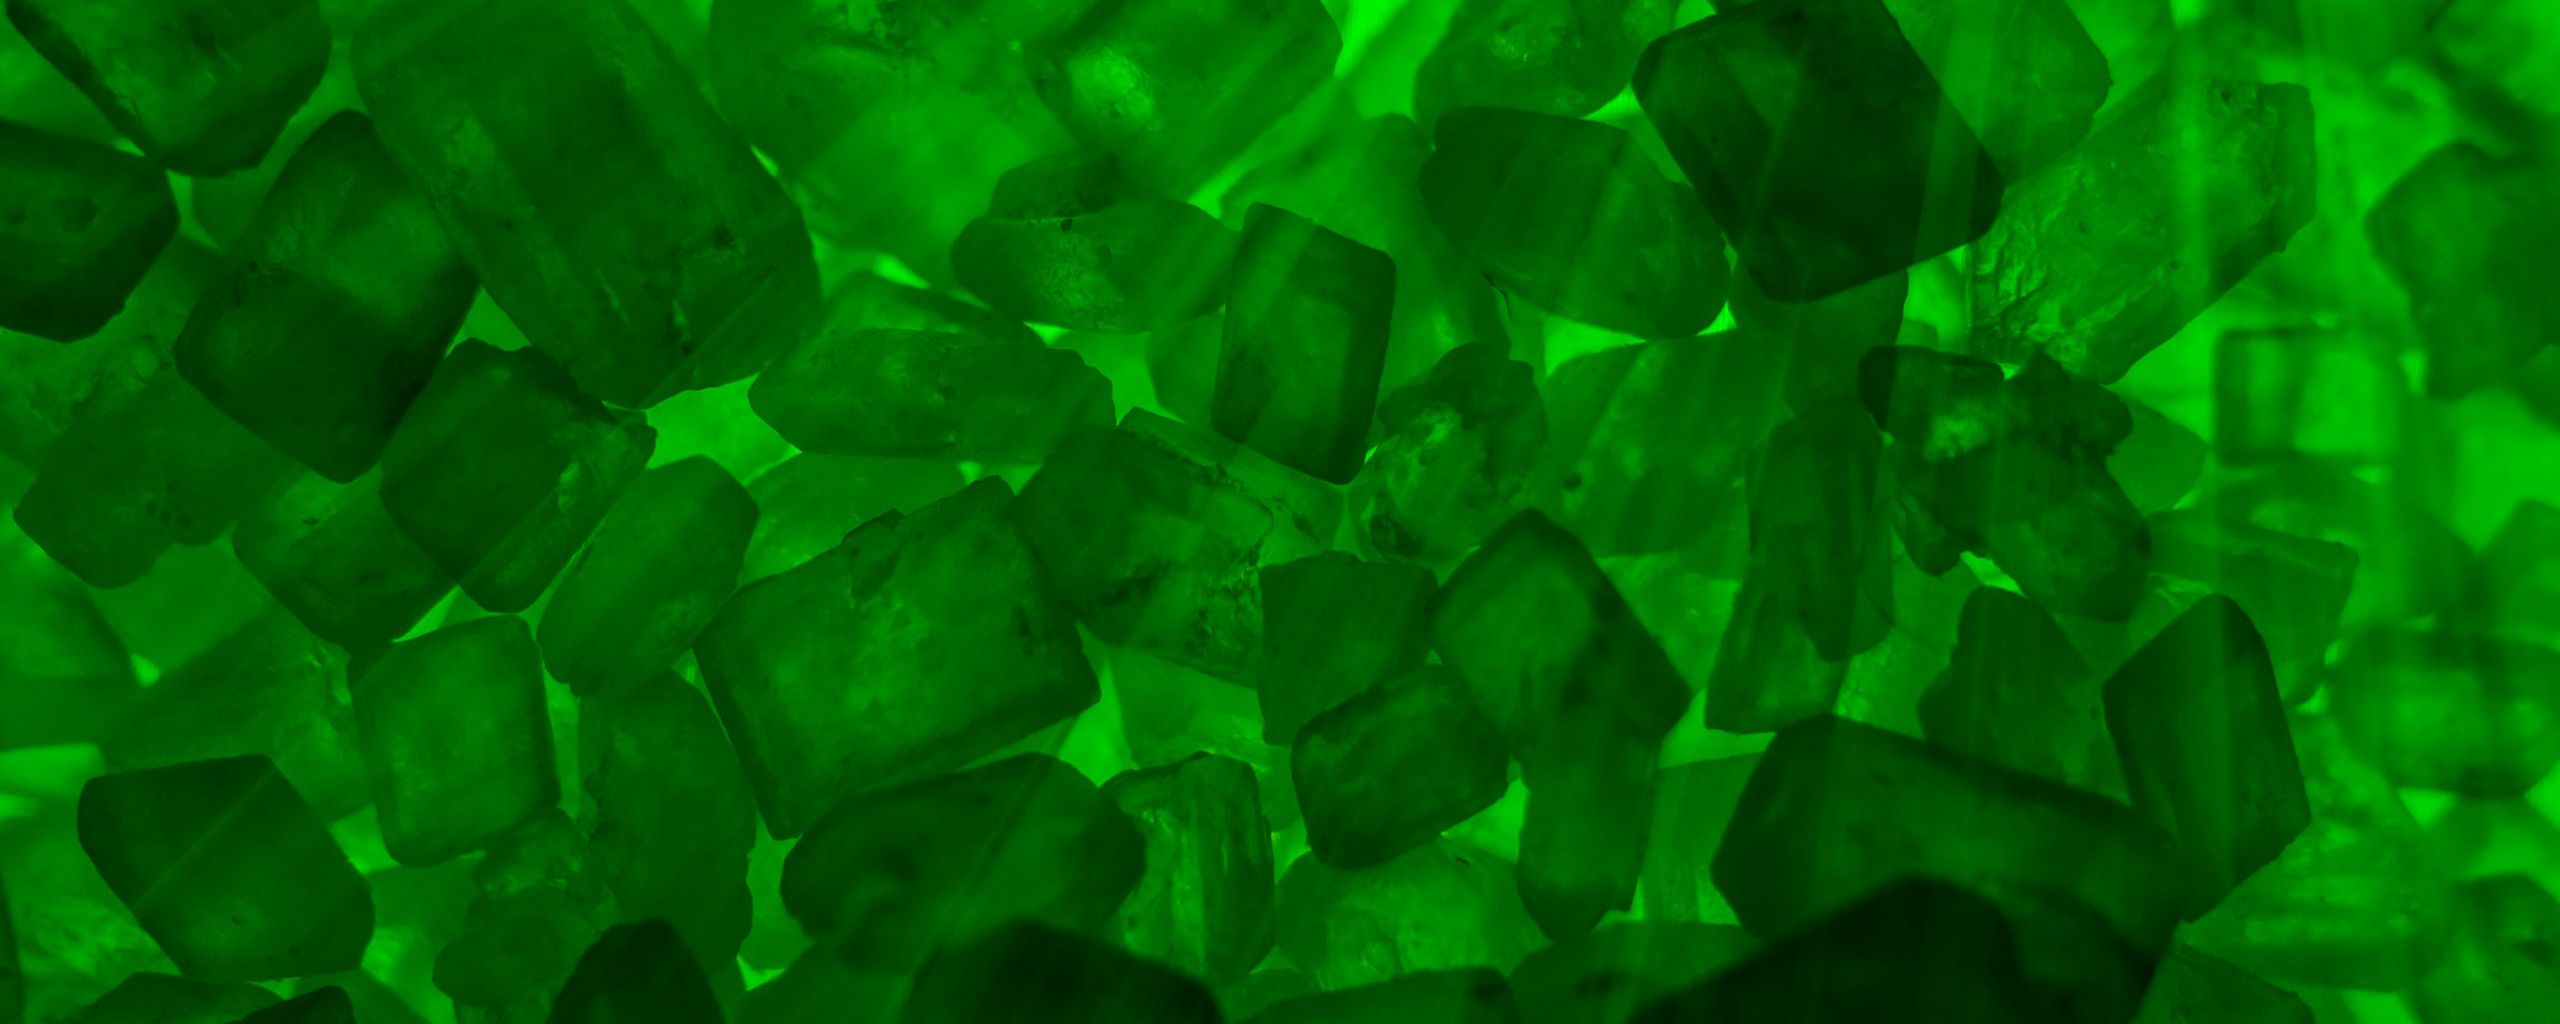 Download wallpaper 2560x1024 stones, crystals, rays, green ultrawide monitor HD background